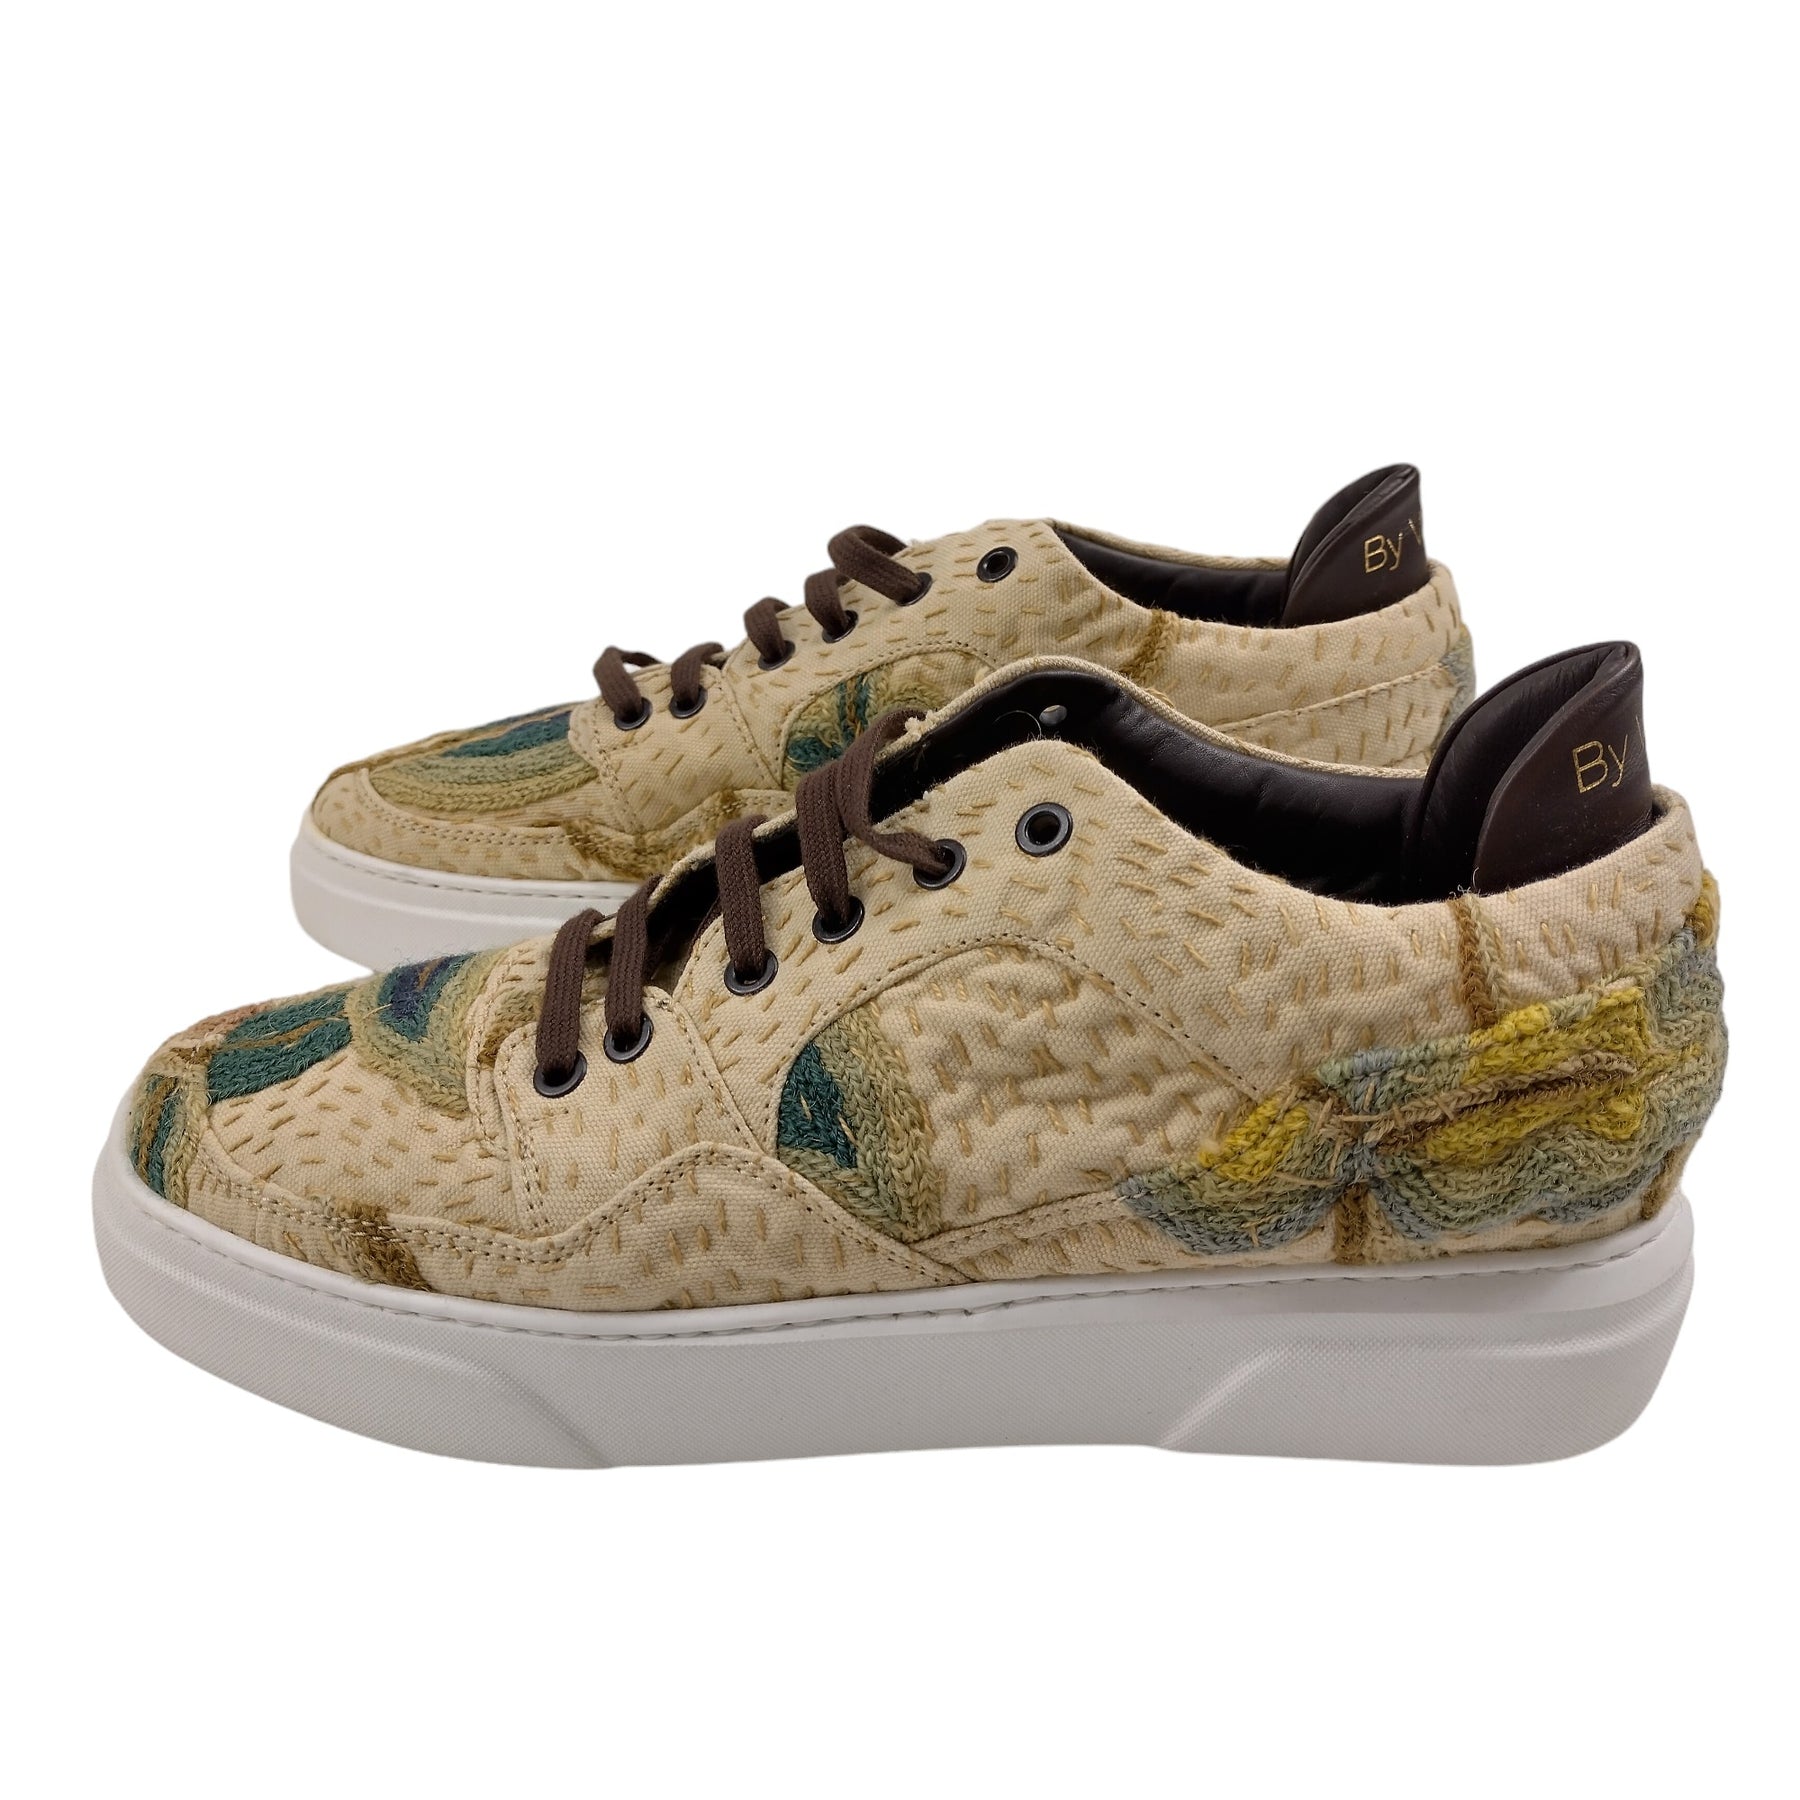 By Walid Cream Embroidered Sneakers